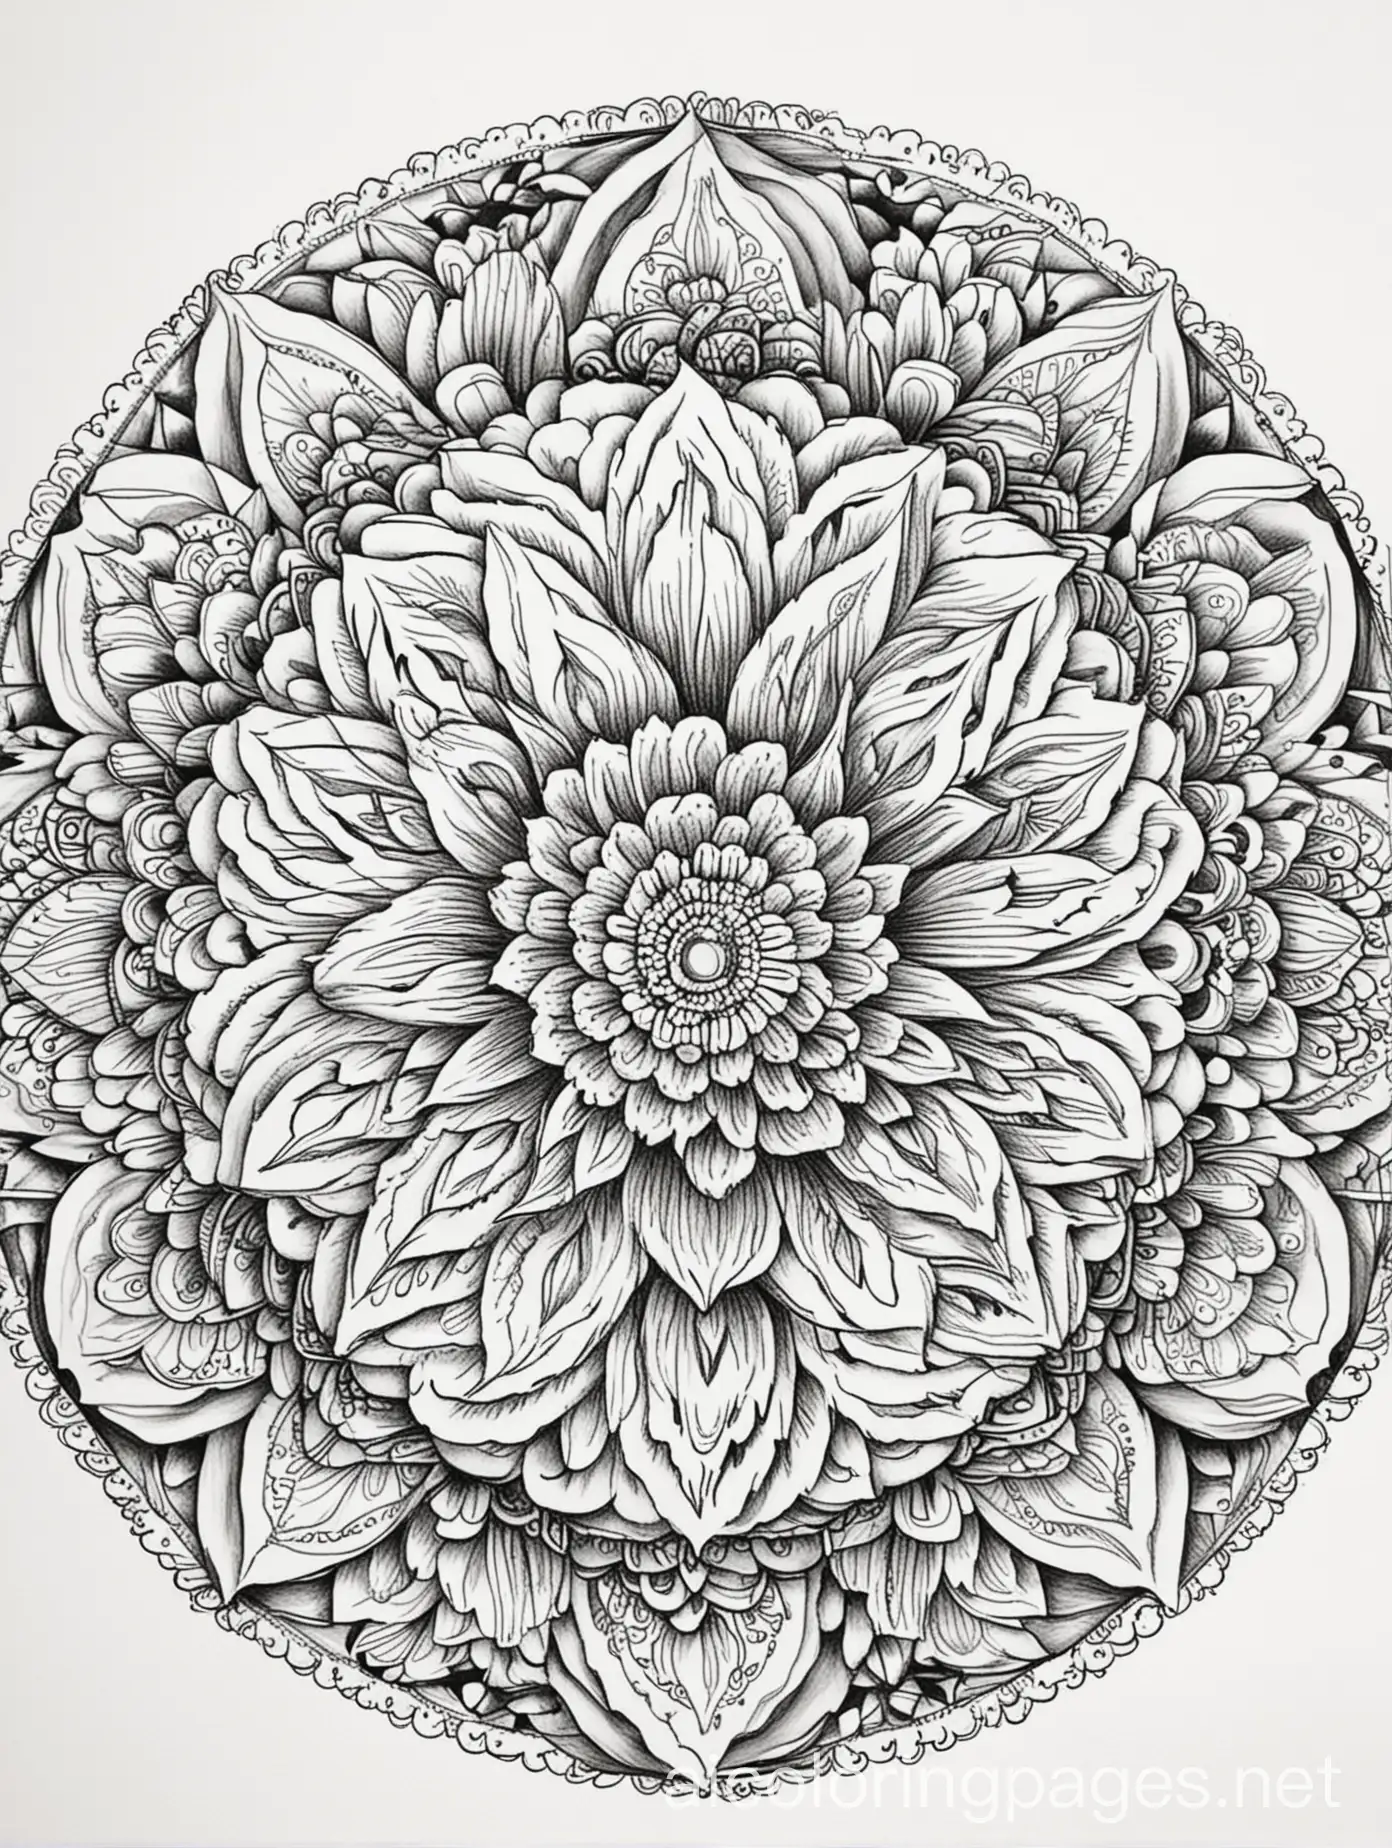 mandala, peaceful mind, coloring mandala flower, Coloring Page, black and white, line art, white background, Simplicity, Ample White Space. The background of the coloring page is plain white to make it easy for young children to color within the lines. The outlines of all the subjects are easy to distinguish, making it simple for kids to color without too much difficulty